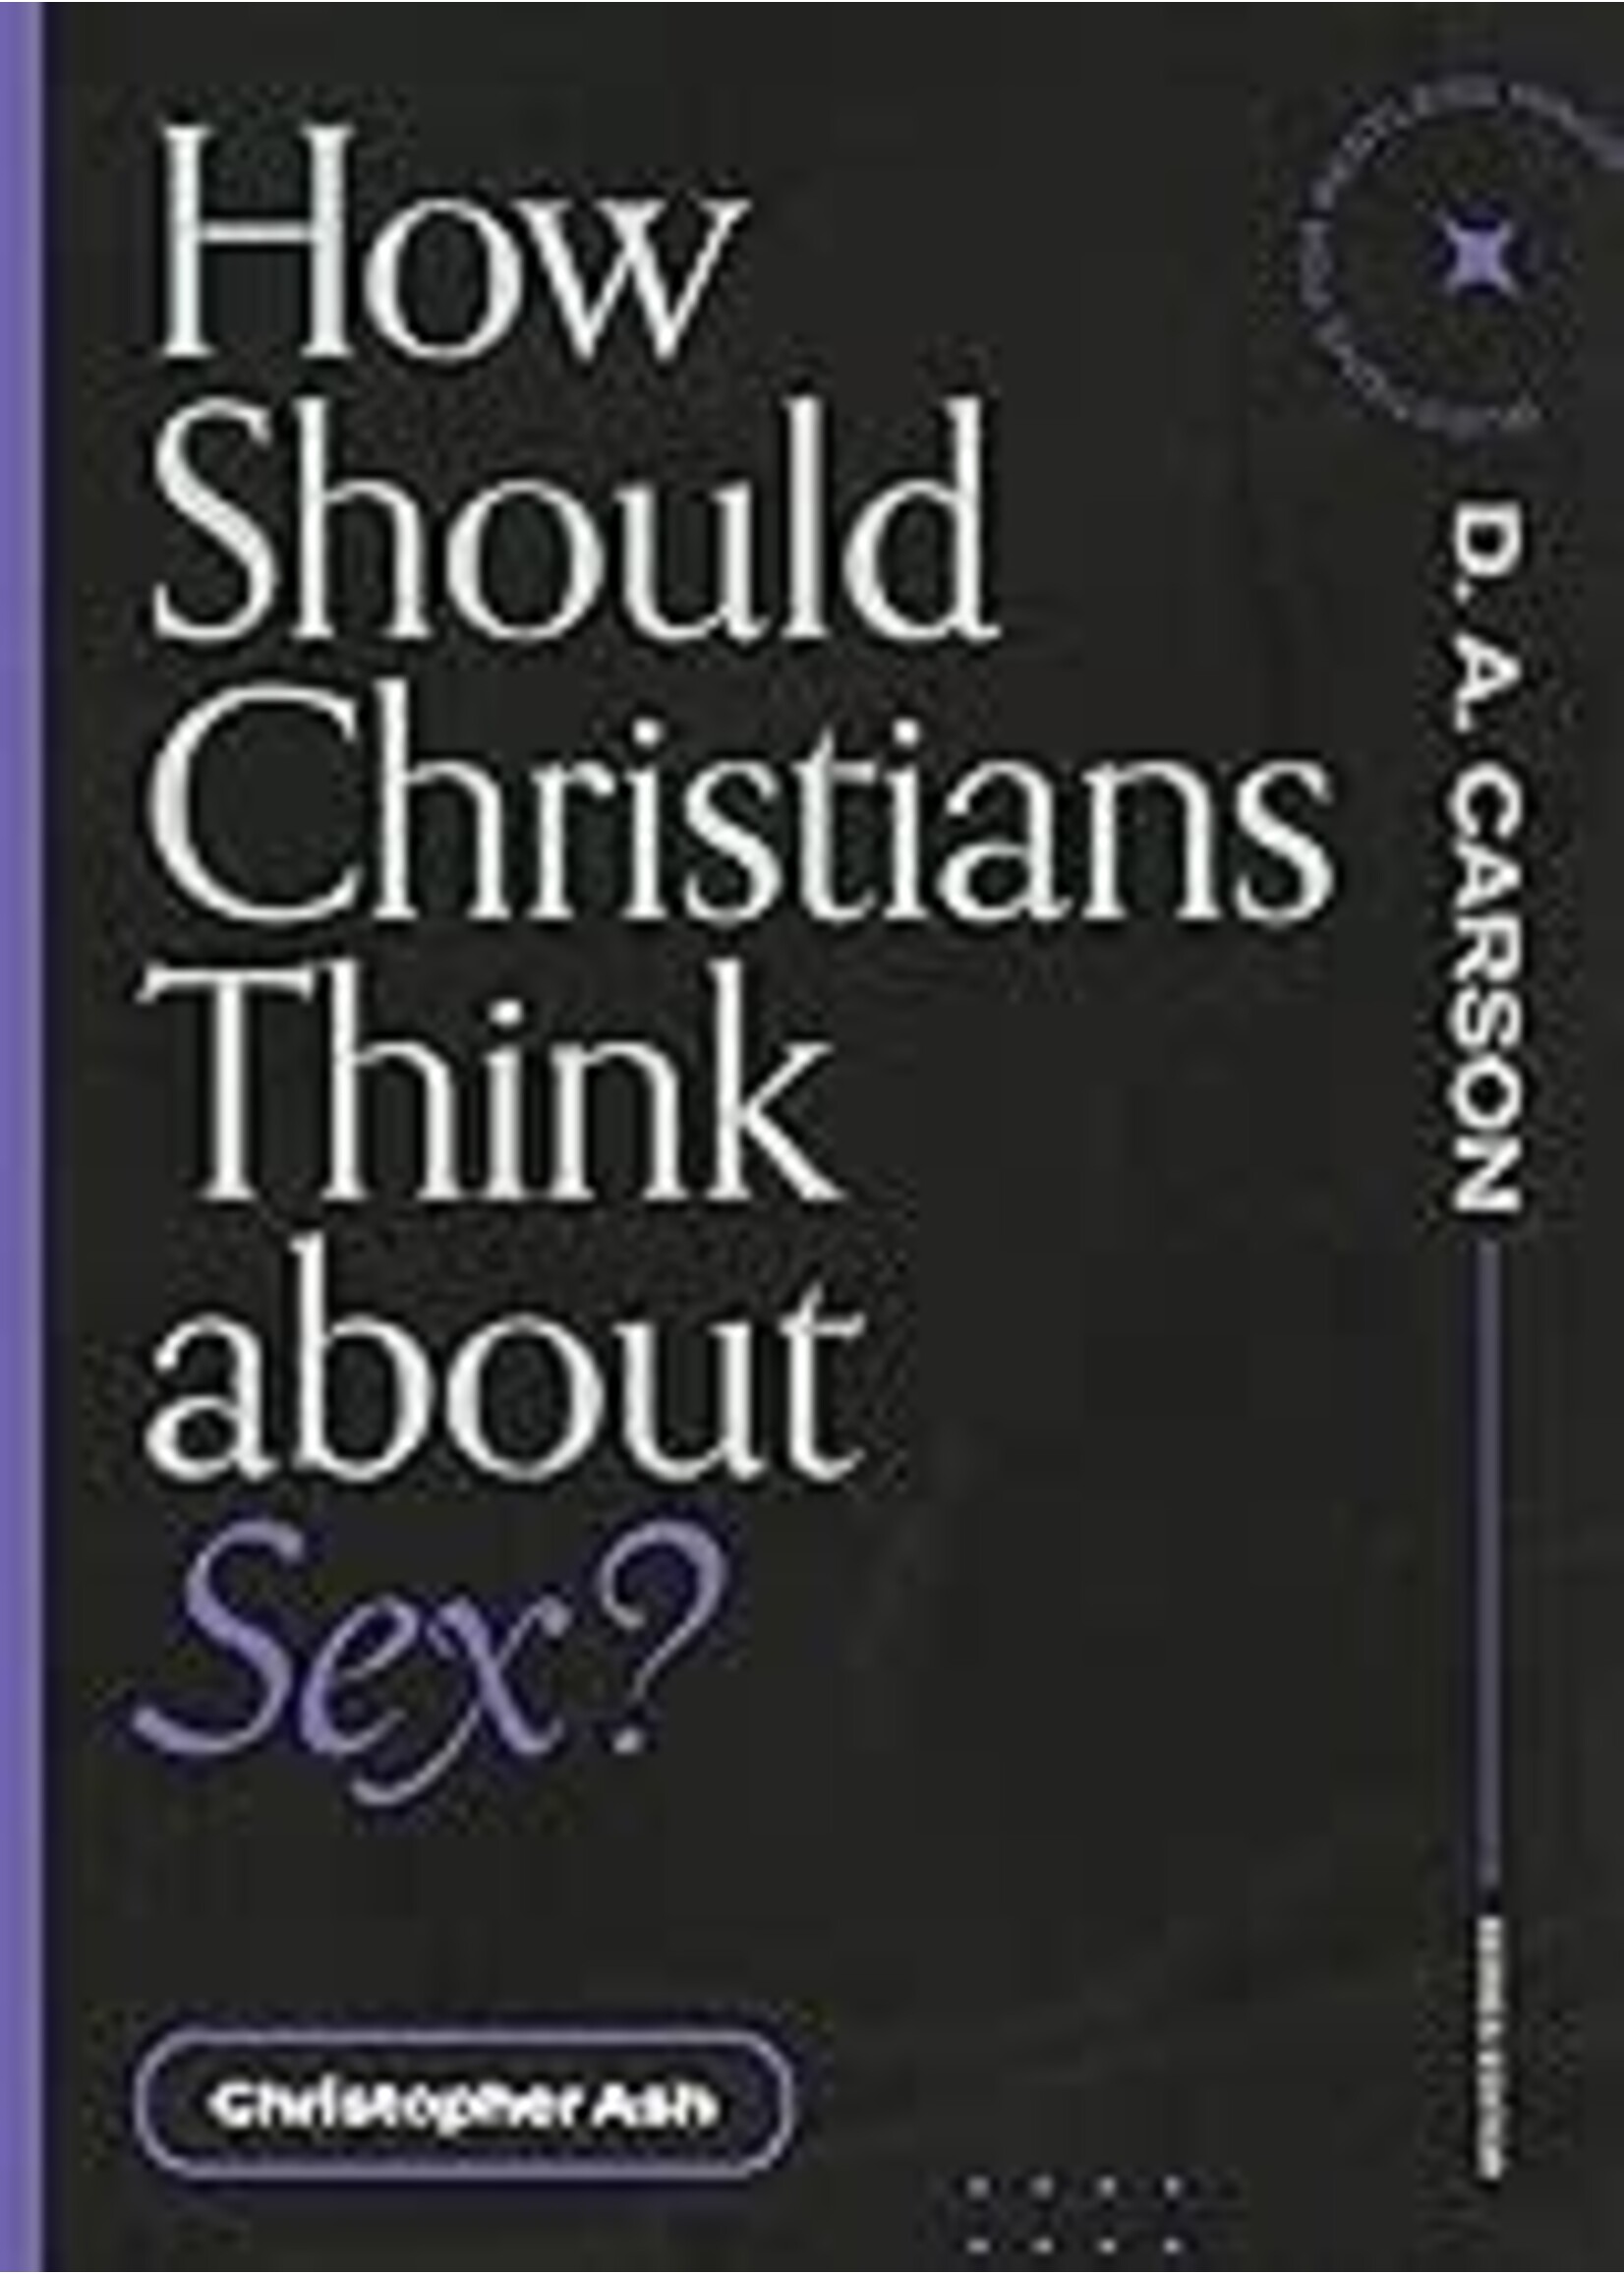 HOW SHOULD CHRISTIANS THINK ABOUT S